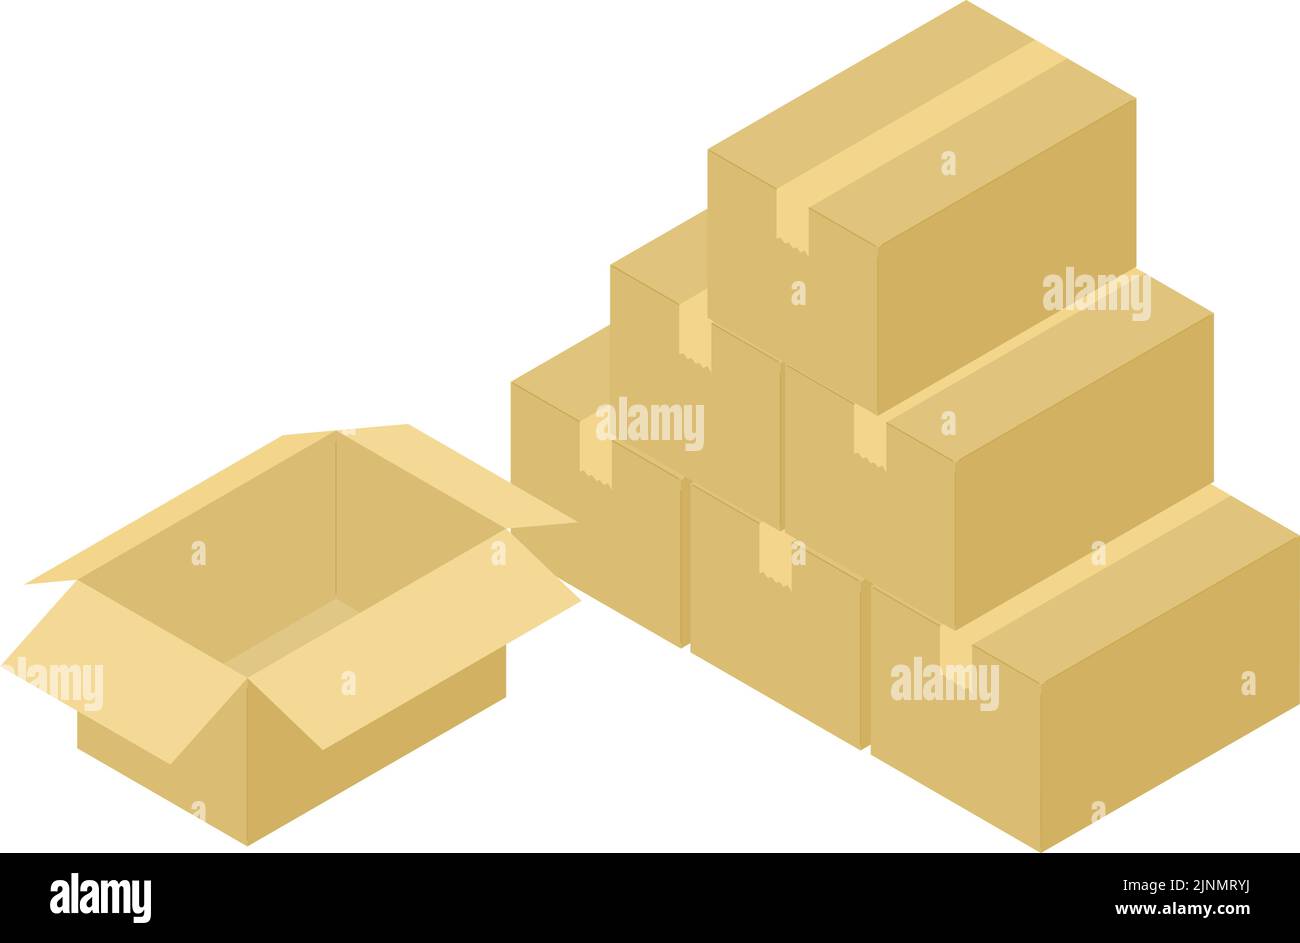 Isometric illustrations of high-stacked cardboard and open-mouthed cardboard Stock Vector